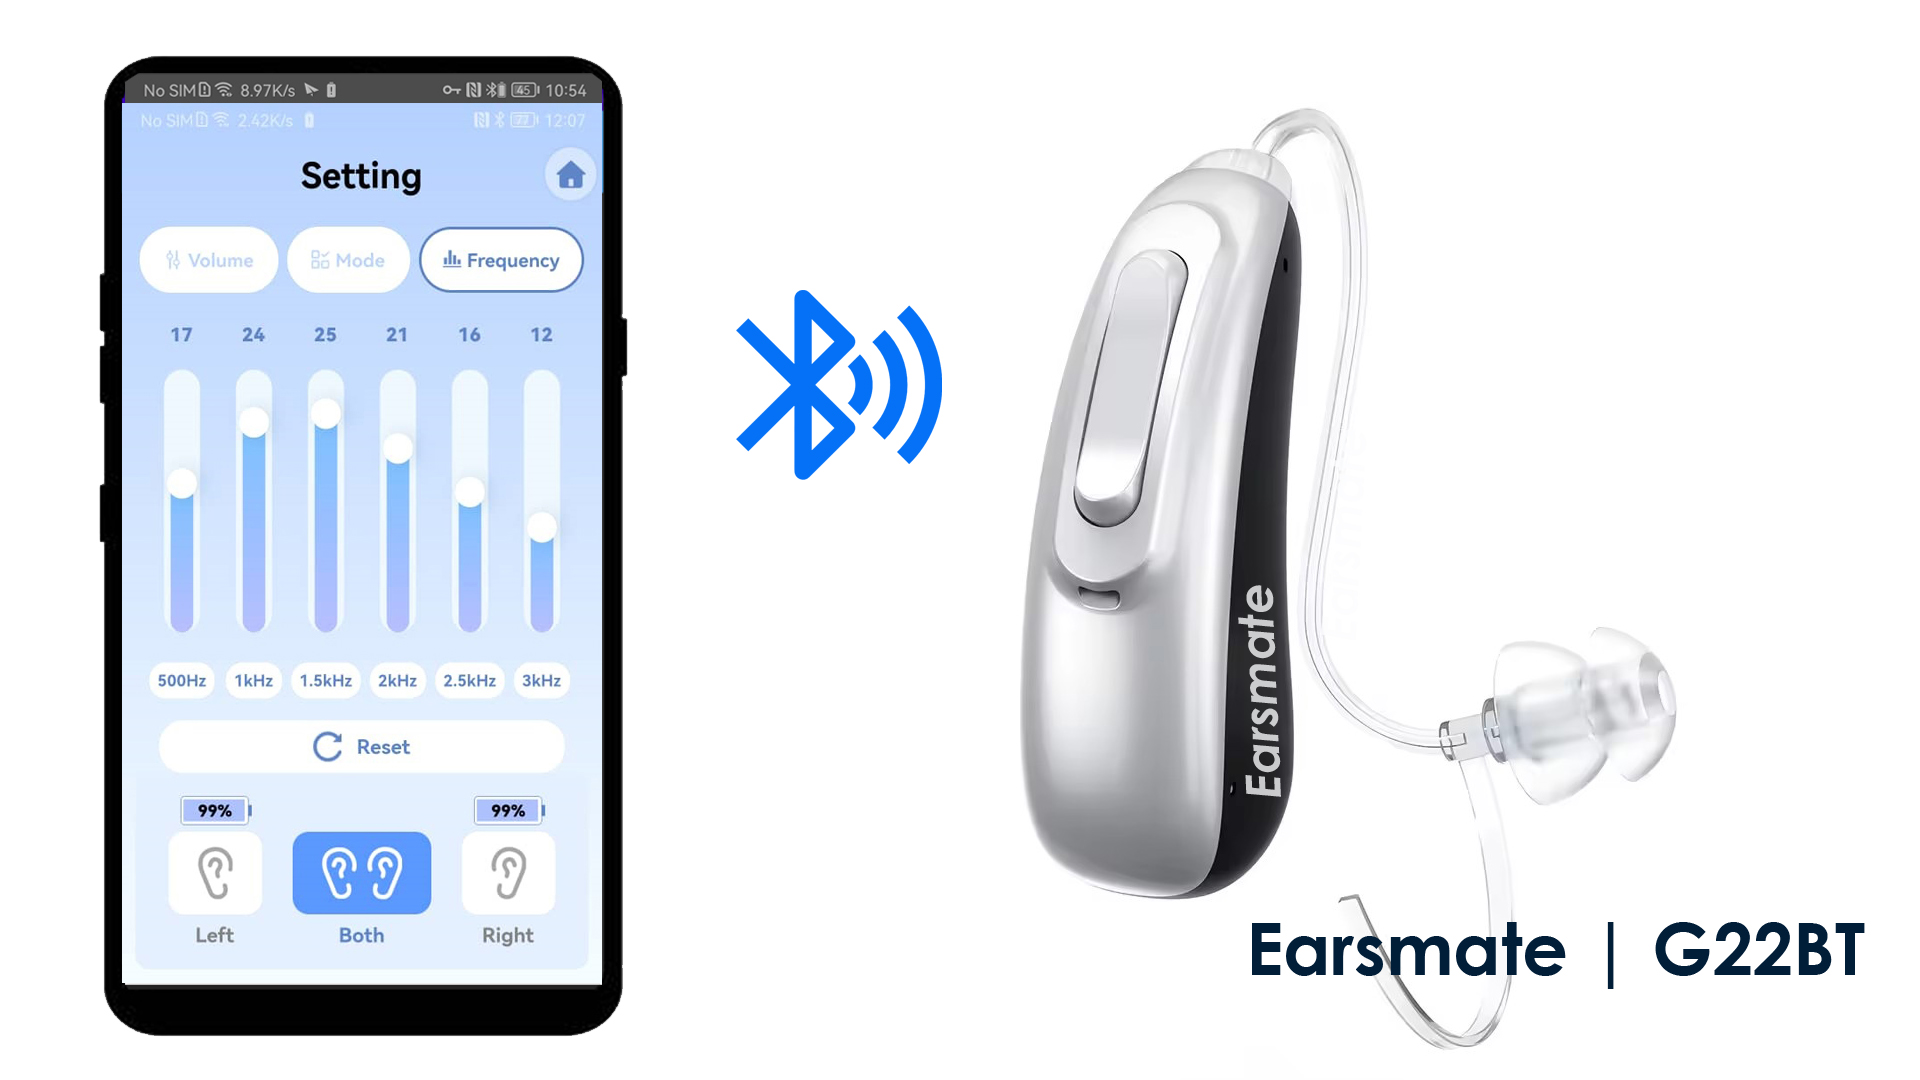 Rechargeable RIC OTC Bluetooth Hearing Aid Cell Phone App for Iphone and Android Earsmate G22BT